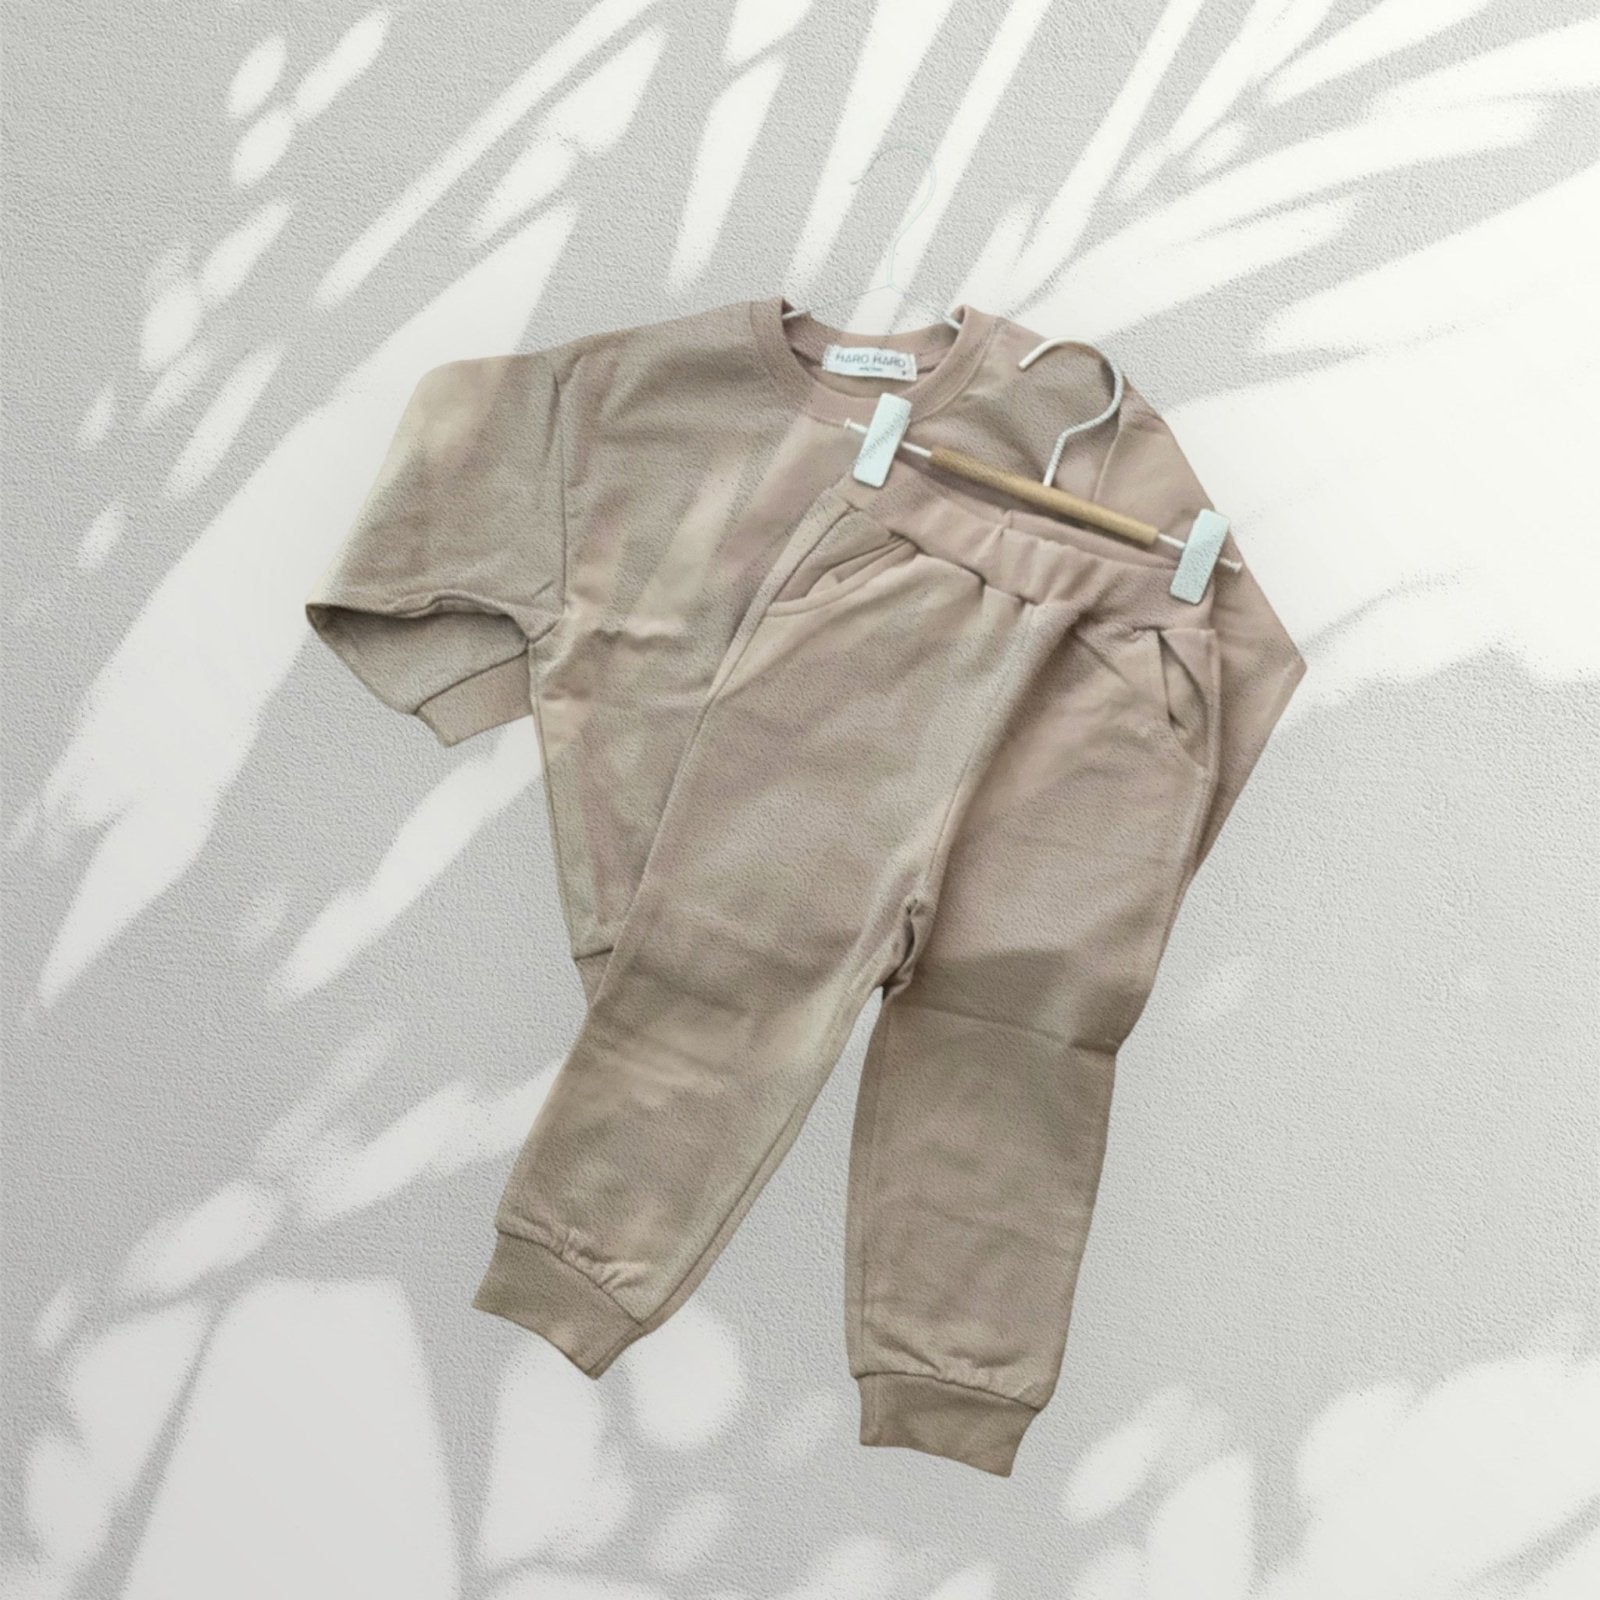 Crayon Jogger Set - Beige find Stylish Fashion for Little People- at Little Foxx Concept Store